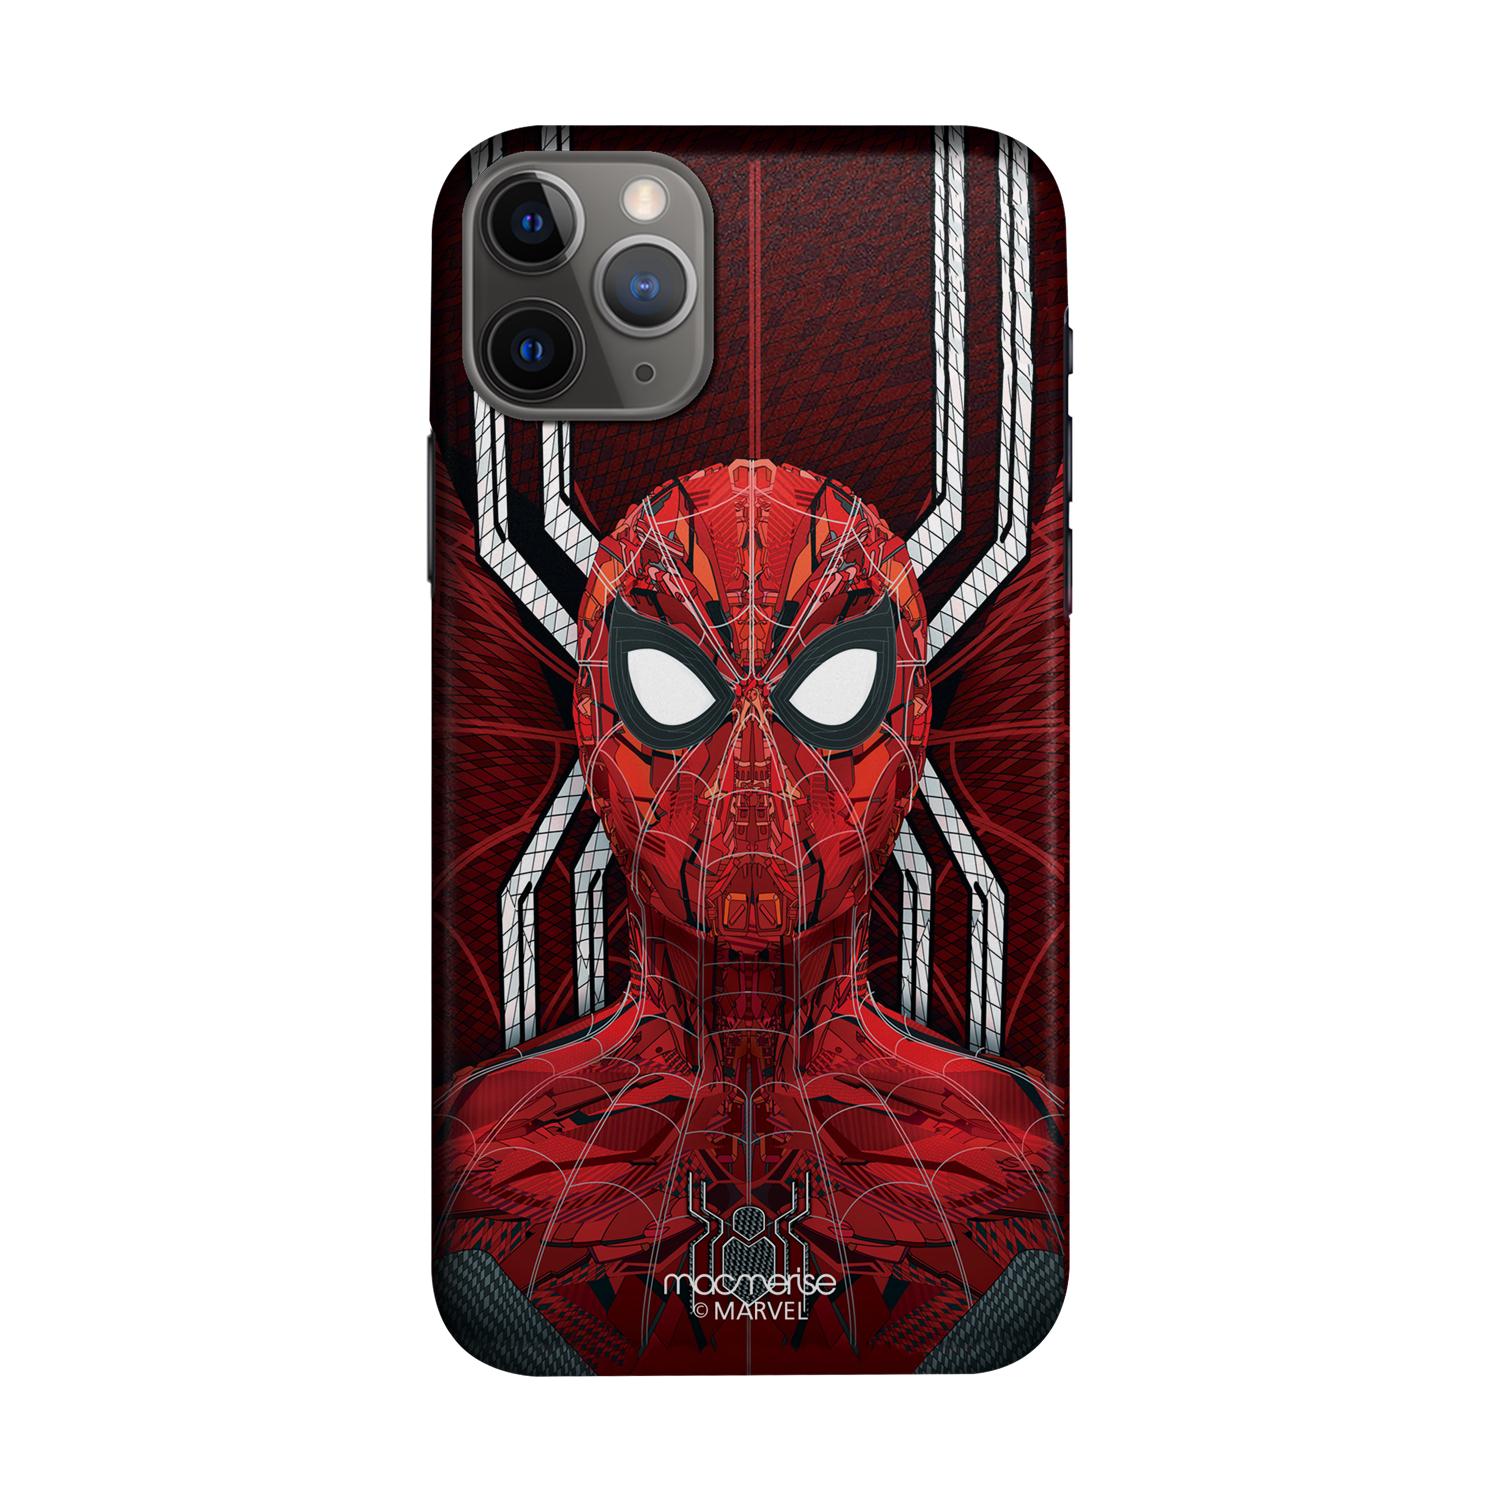 Buy Spidey Stance - Sleek Phone Case for iPhone 11 Pro Max Online